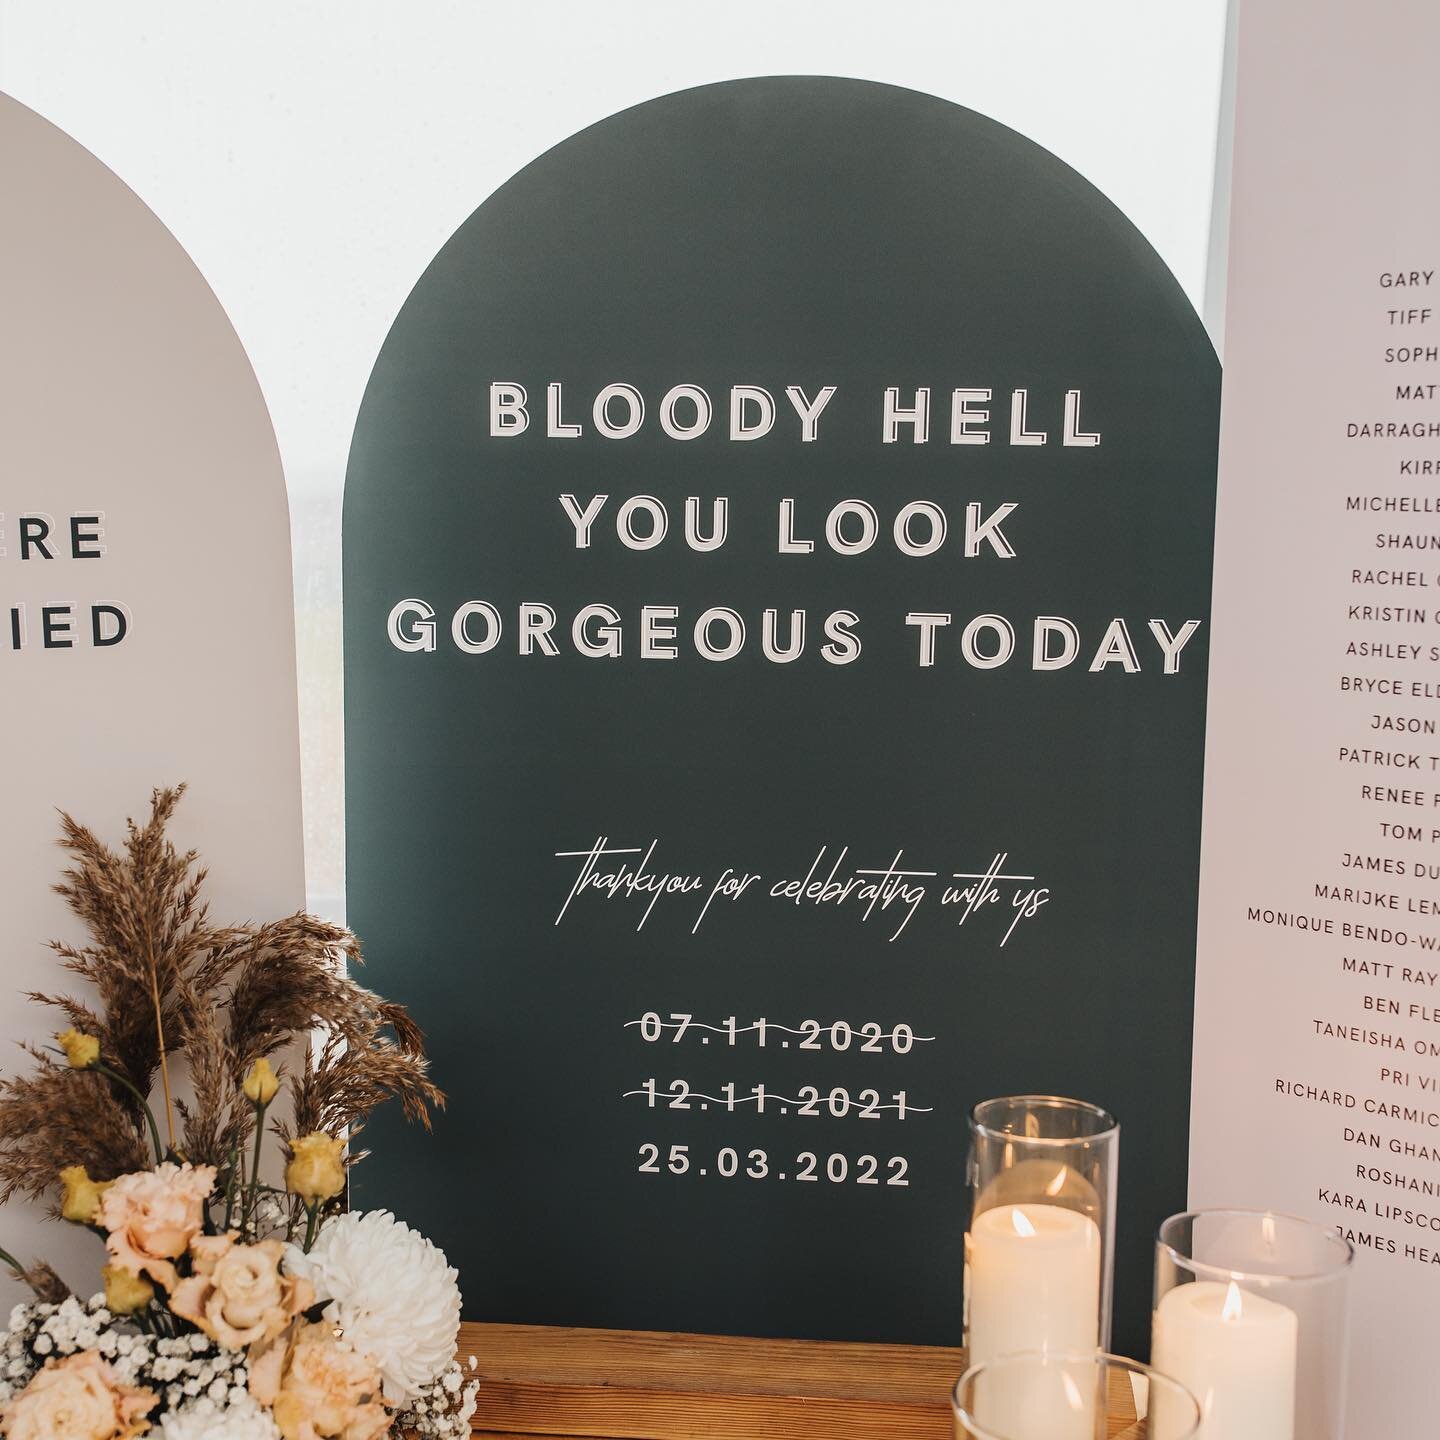 YEH YOU DO 🤘🏼👏🏼❤️ happy weekend lovers &amp; friends. Wedding coming up? Don&rsquo;t forget to book your signage in!! 🔥🥰
.
.
📷 @nadinnegracephotography 
.
.
#littleivy #weddingstationery #weddingsignage #weddinginvites #australianwedding #sout